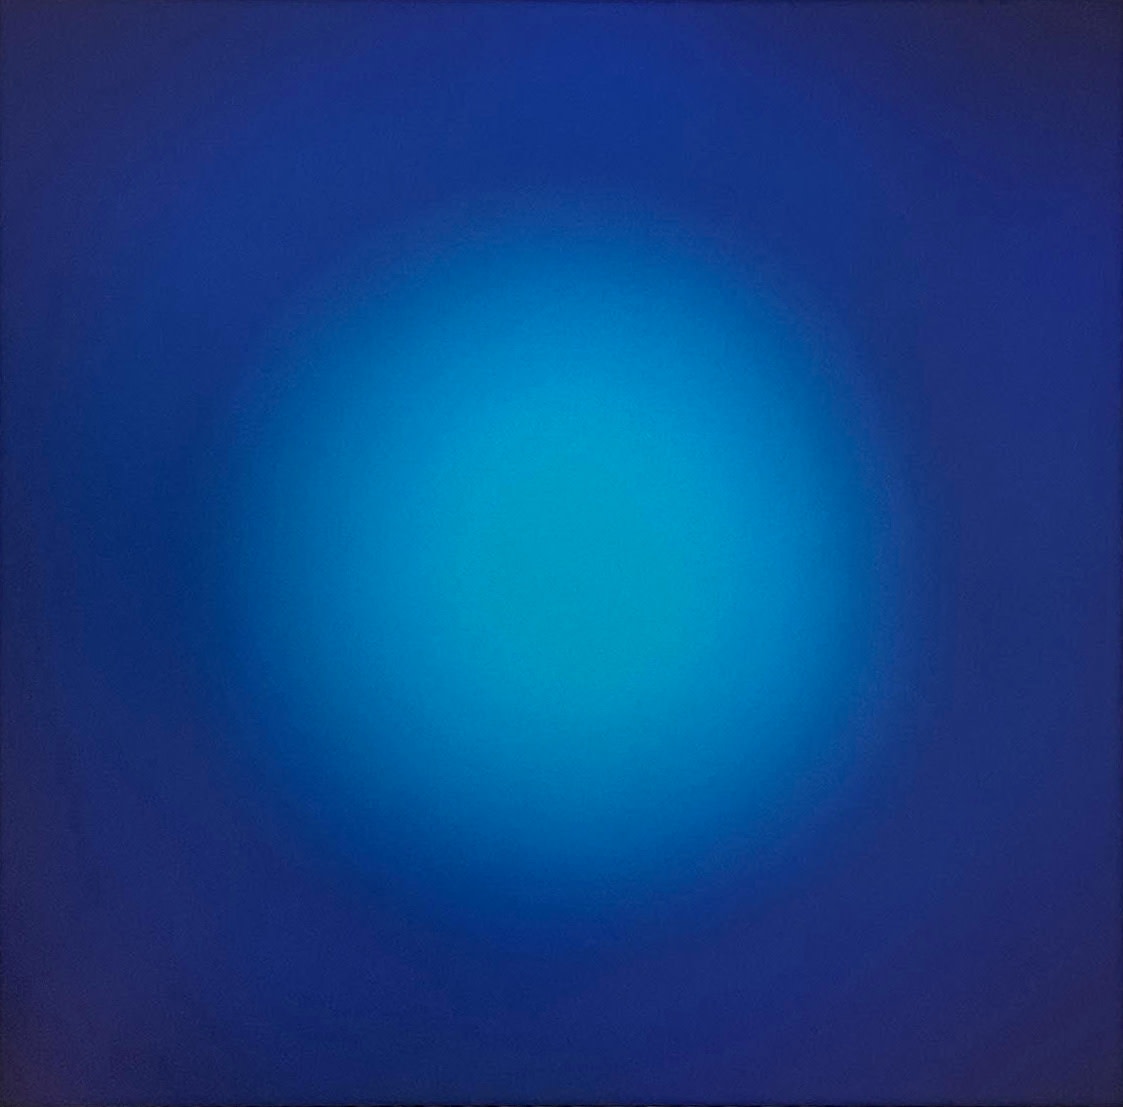 Bill Armstrong, Blue Sphere #437, 2012